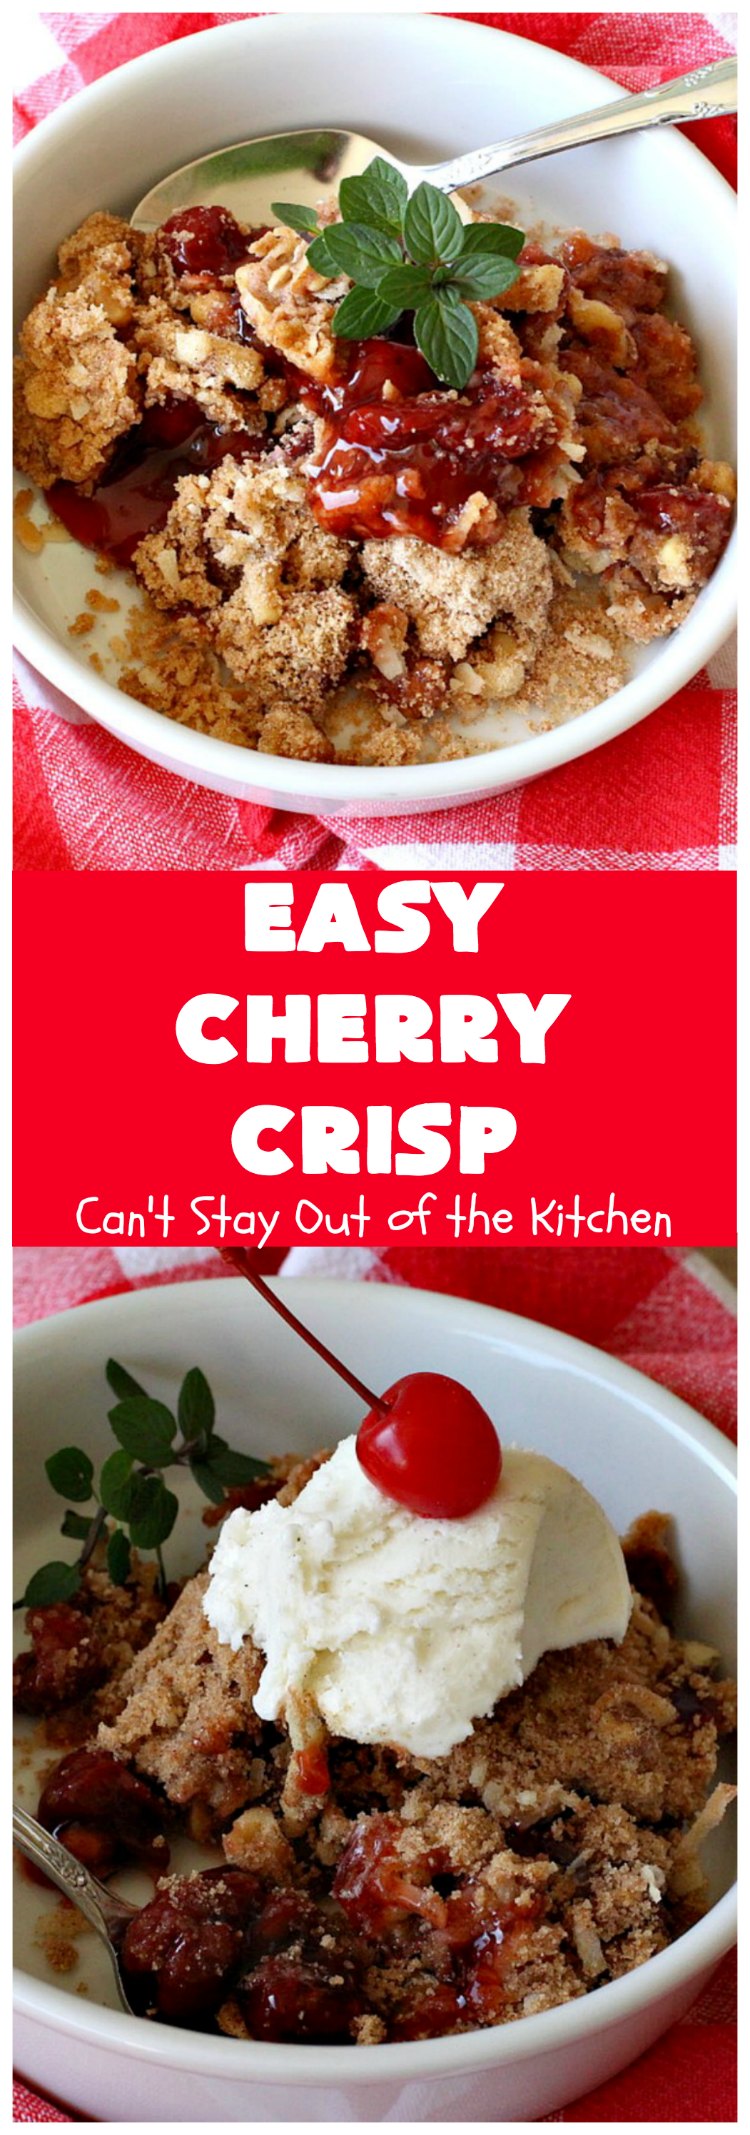 Easy Cherry Crisp| Can't Stay Out of the Kitchen | This scrumptious #dessert is also quick, easy & simple to make. Perfect for company or #ValentinesDay or other #holidays. #cherries #CherryDessert #EasyCherryCrisp